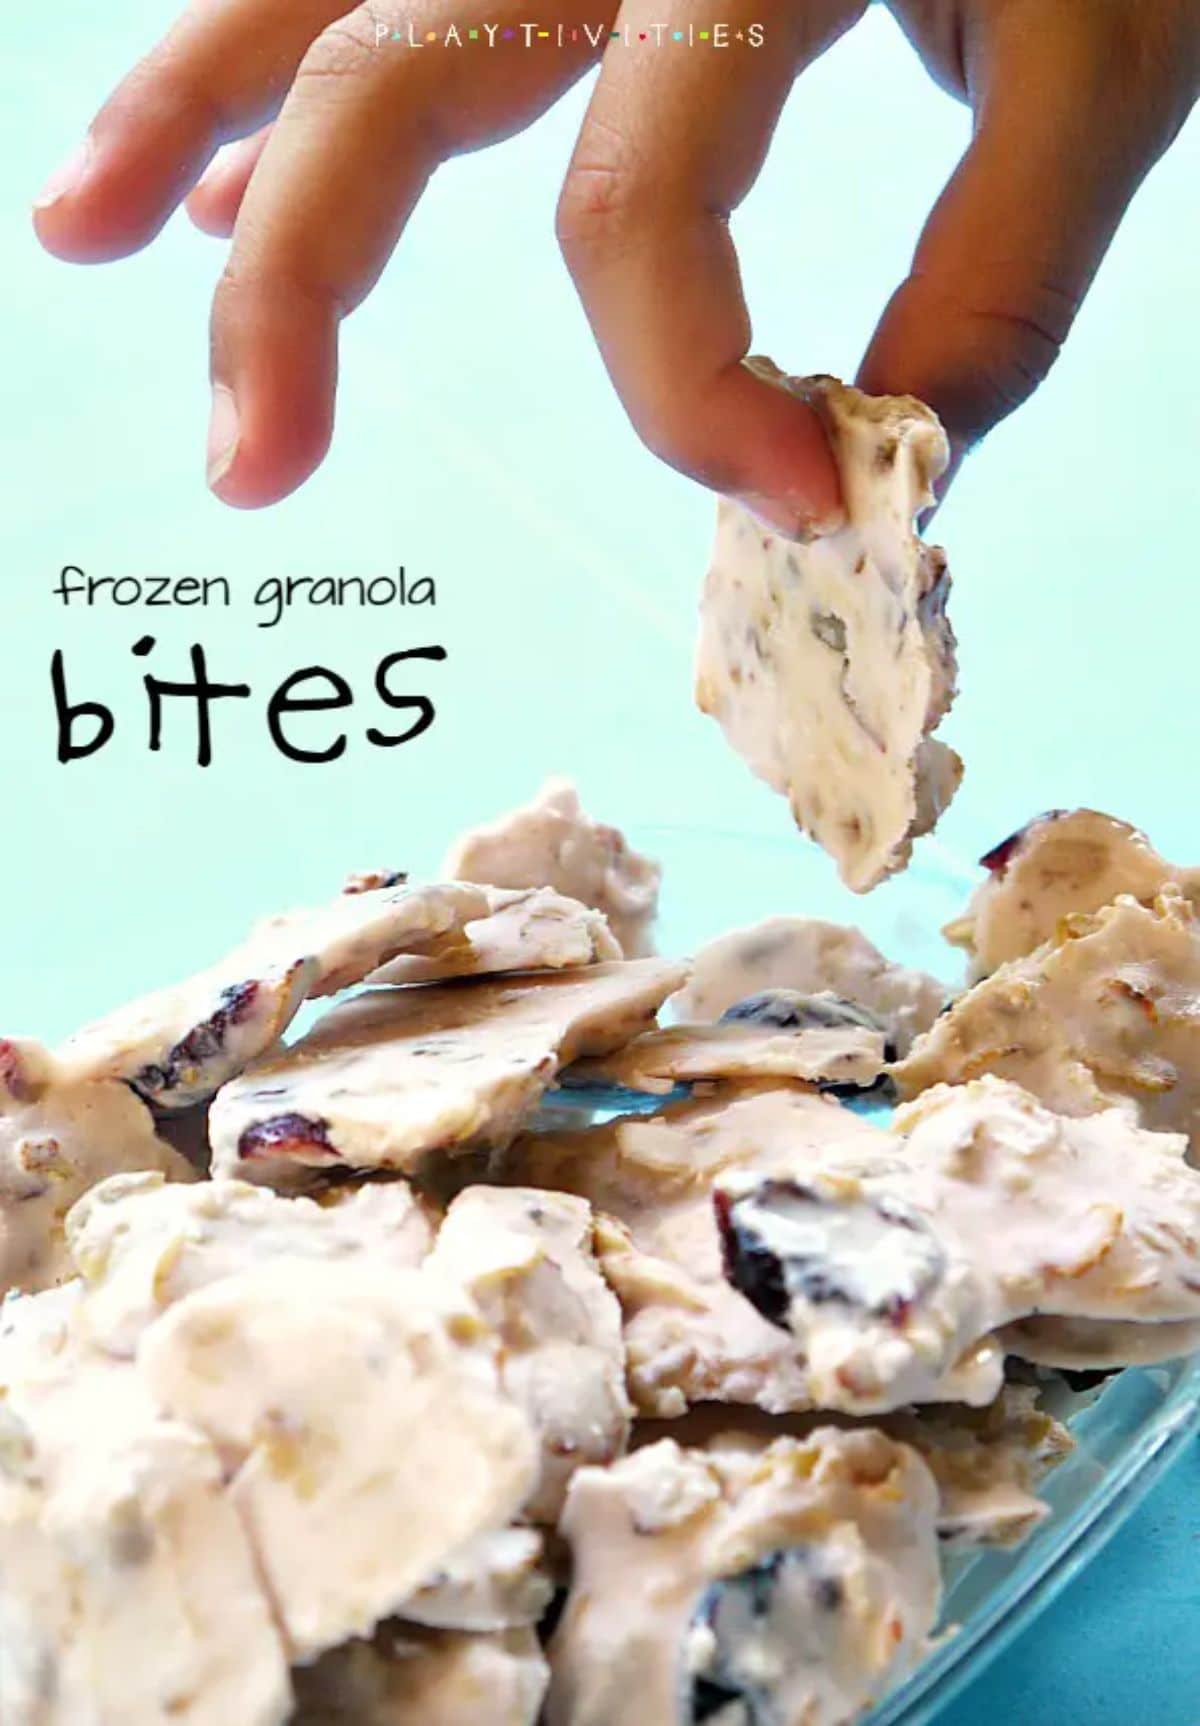 A hand picks out a yoghurt granols bite from a plate of bites The text reads "frozen granola bites"